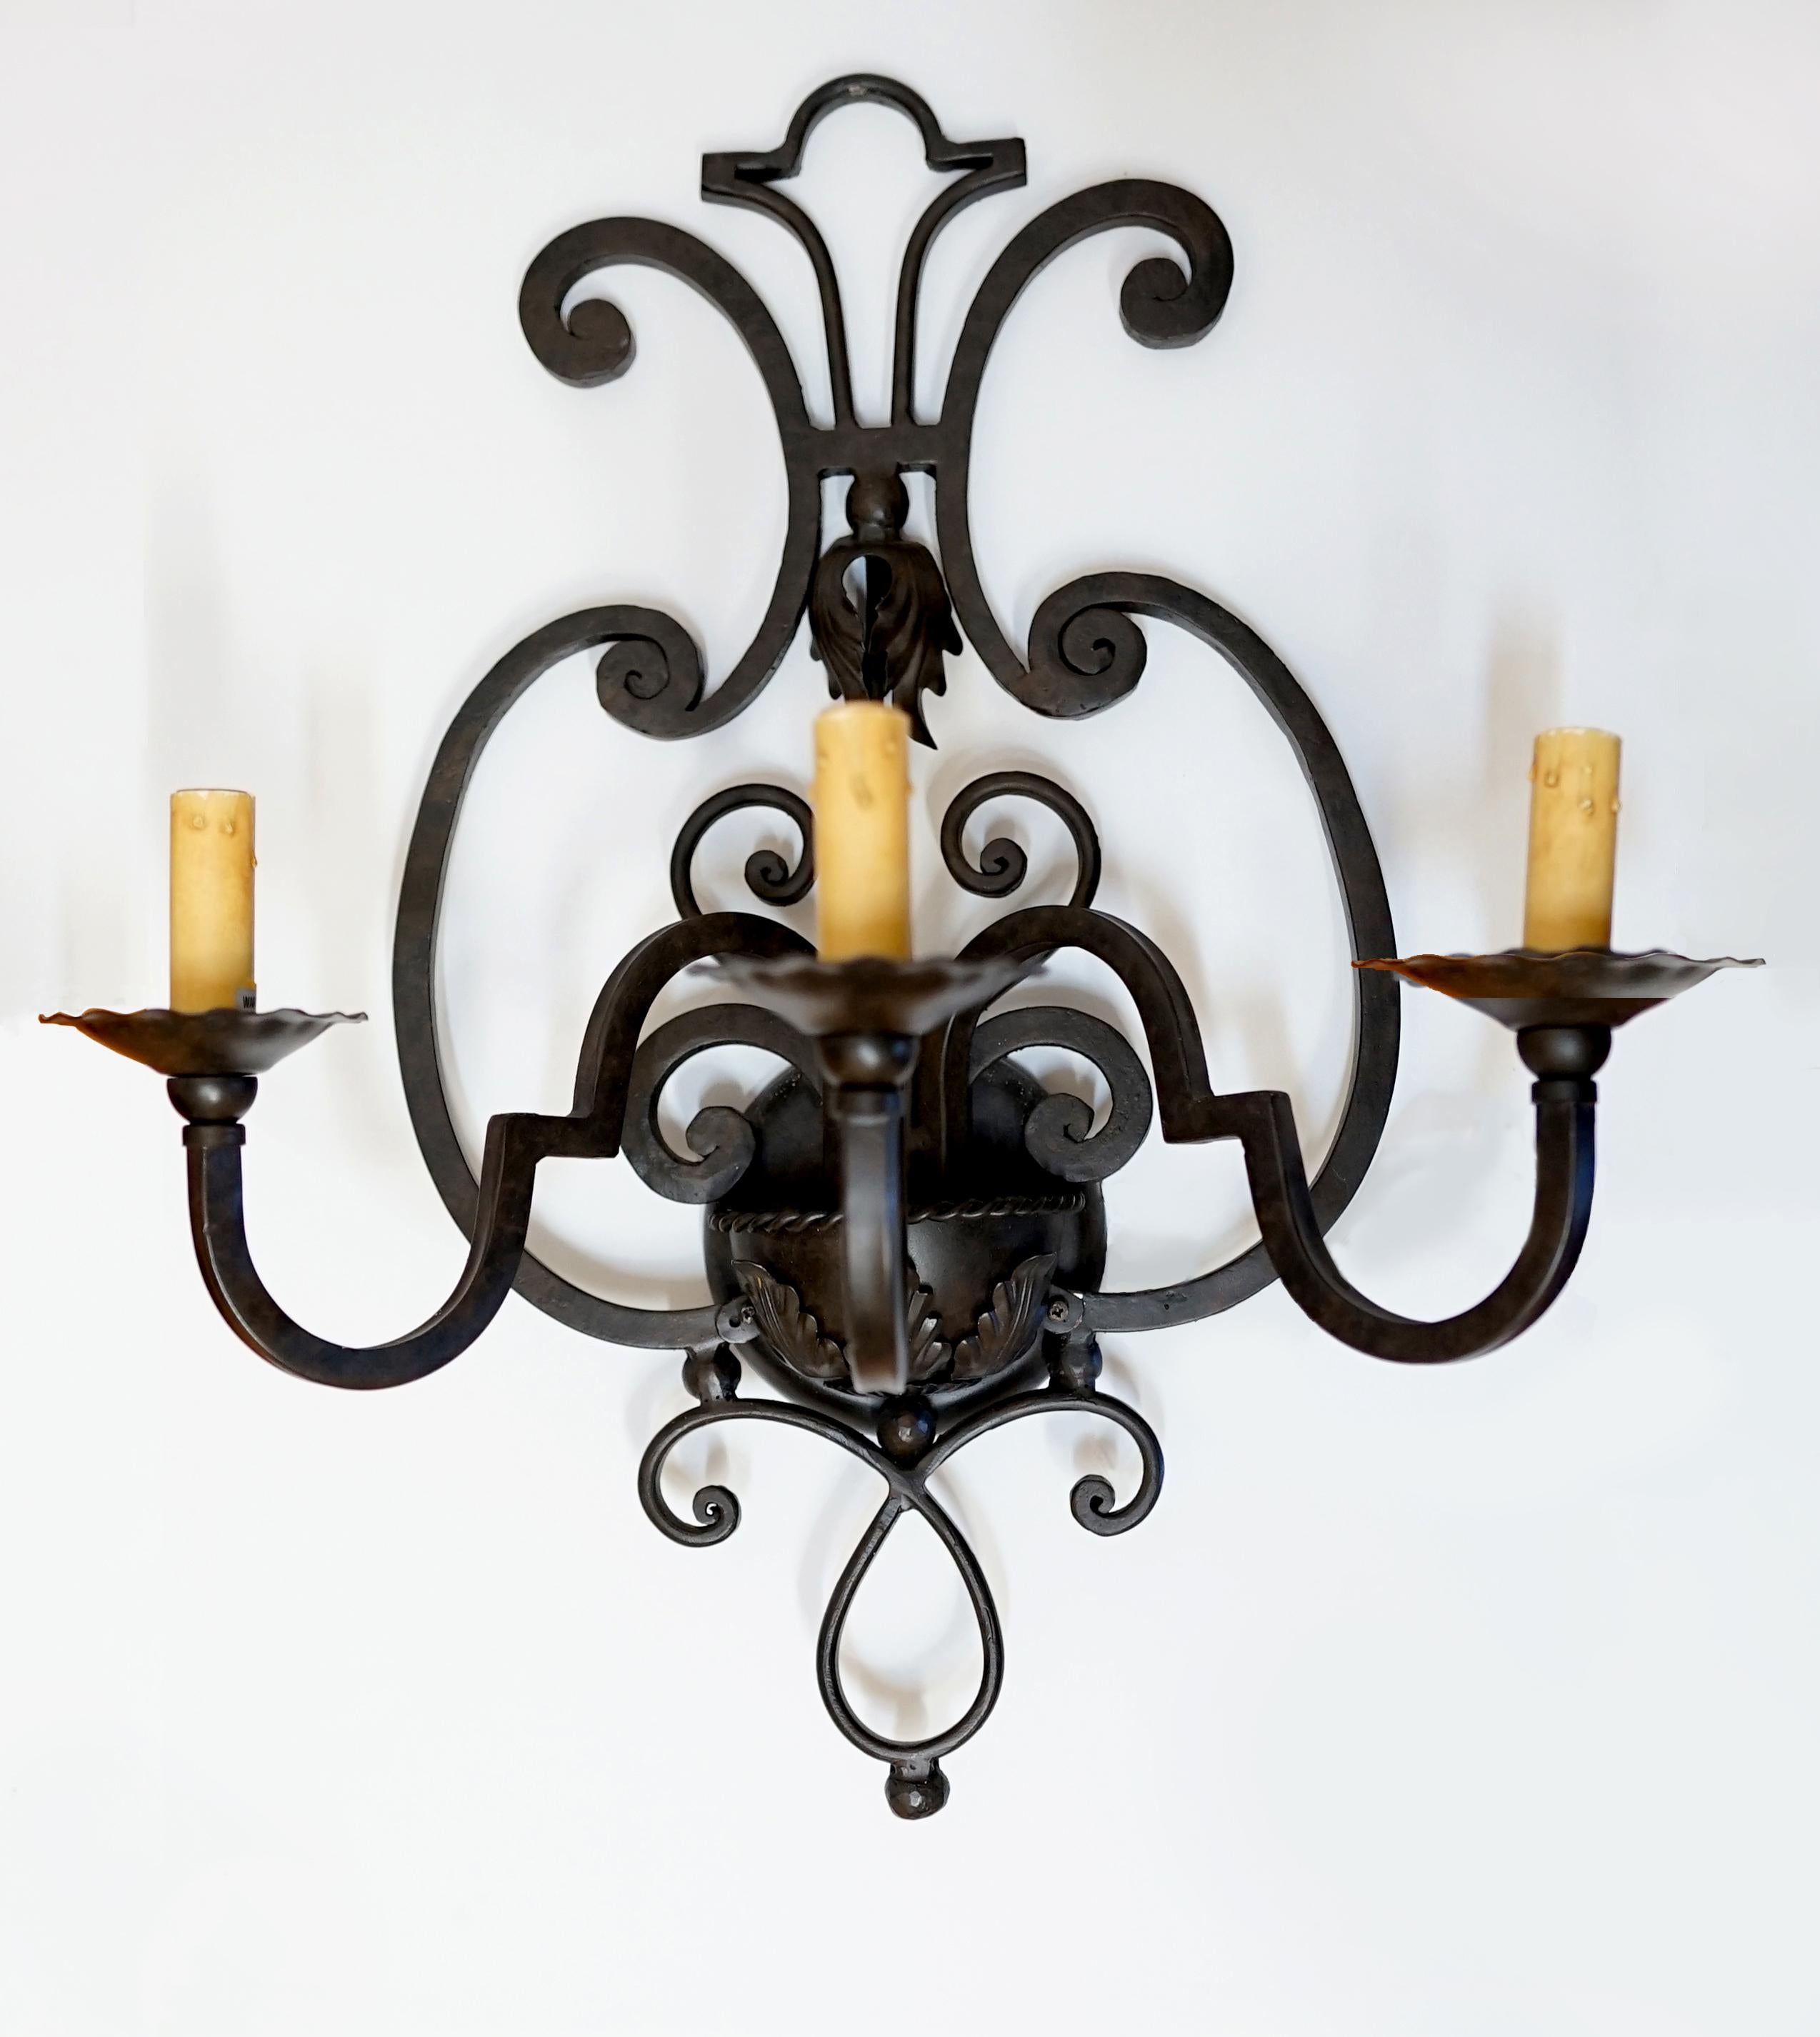 Arte de Mexico, the Southern California lighting creator for 40 years presents this fabulous pair of old Spanish style sconces. The hand crafted sconces are completed by Mica shades which create a warm light. Arte de Mexico utilizes old world hand